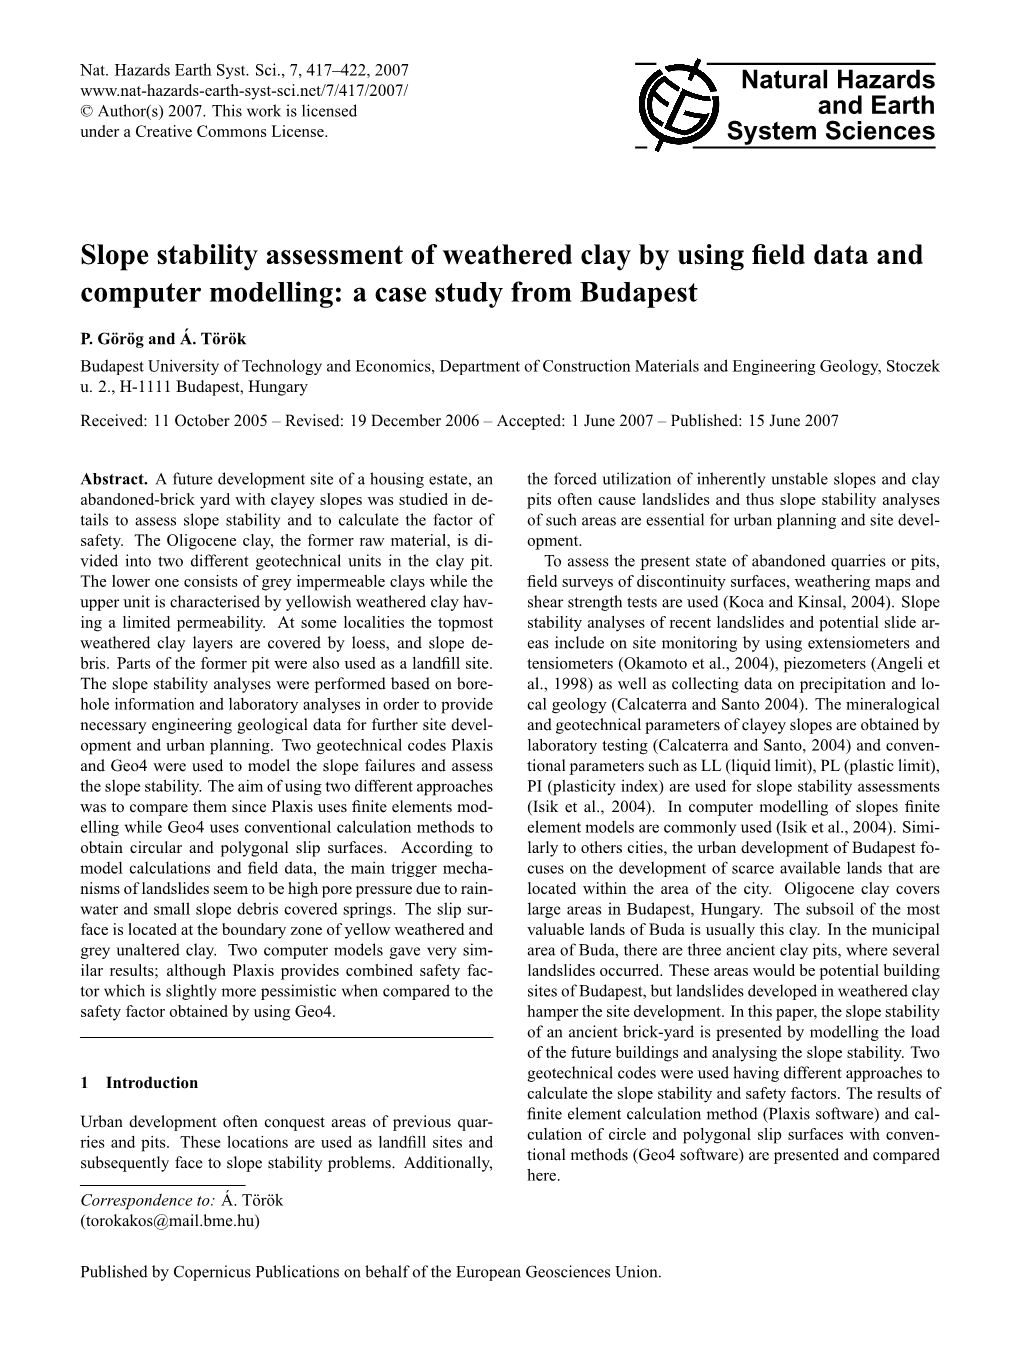 Slope Stability Assessment of Weathered Clay by Using ﬁeld Data and Computer Modelling: a Case Study from Budapest